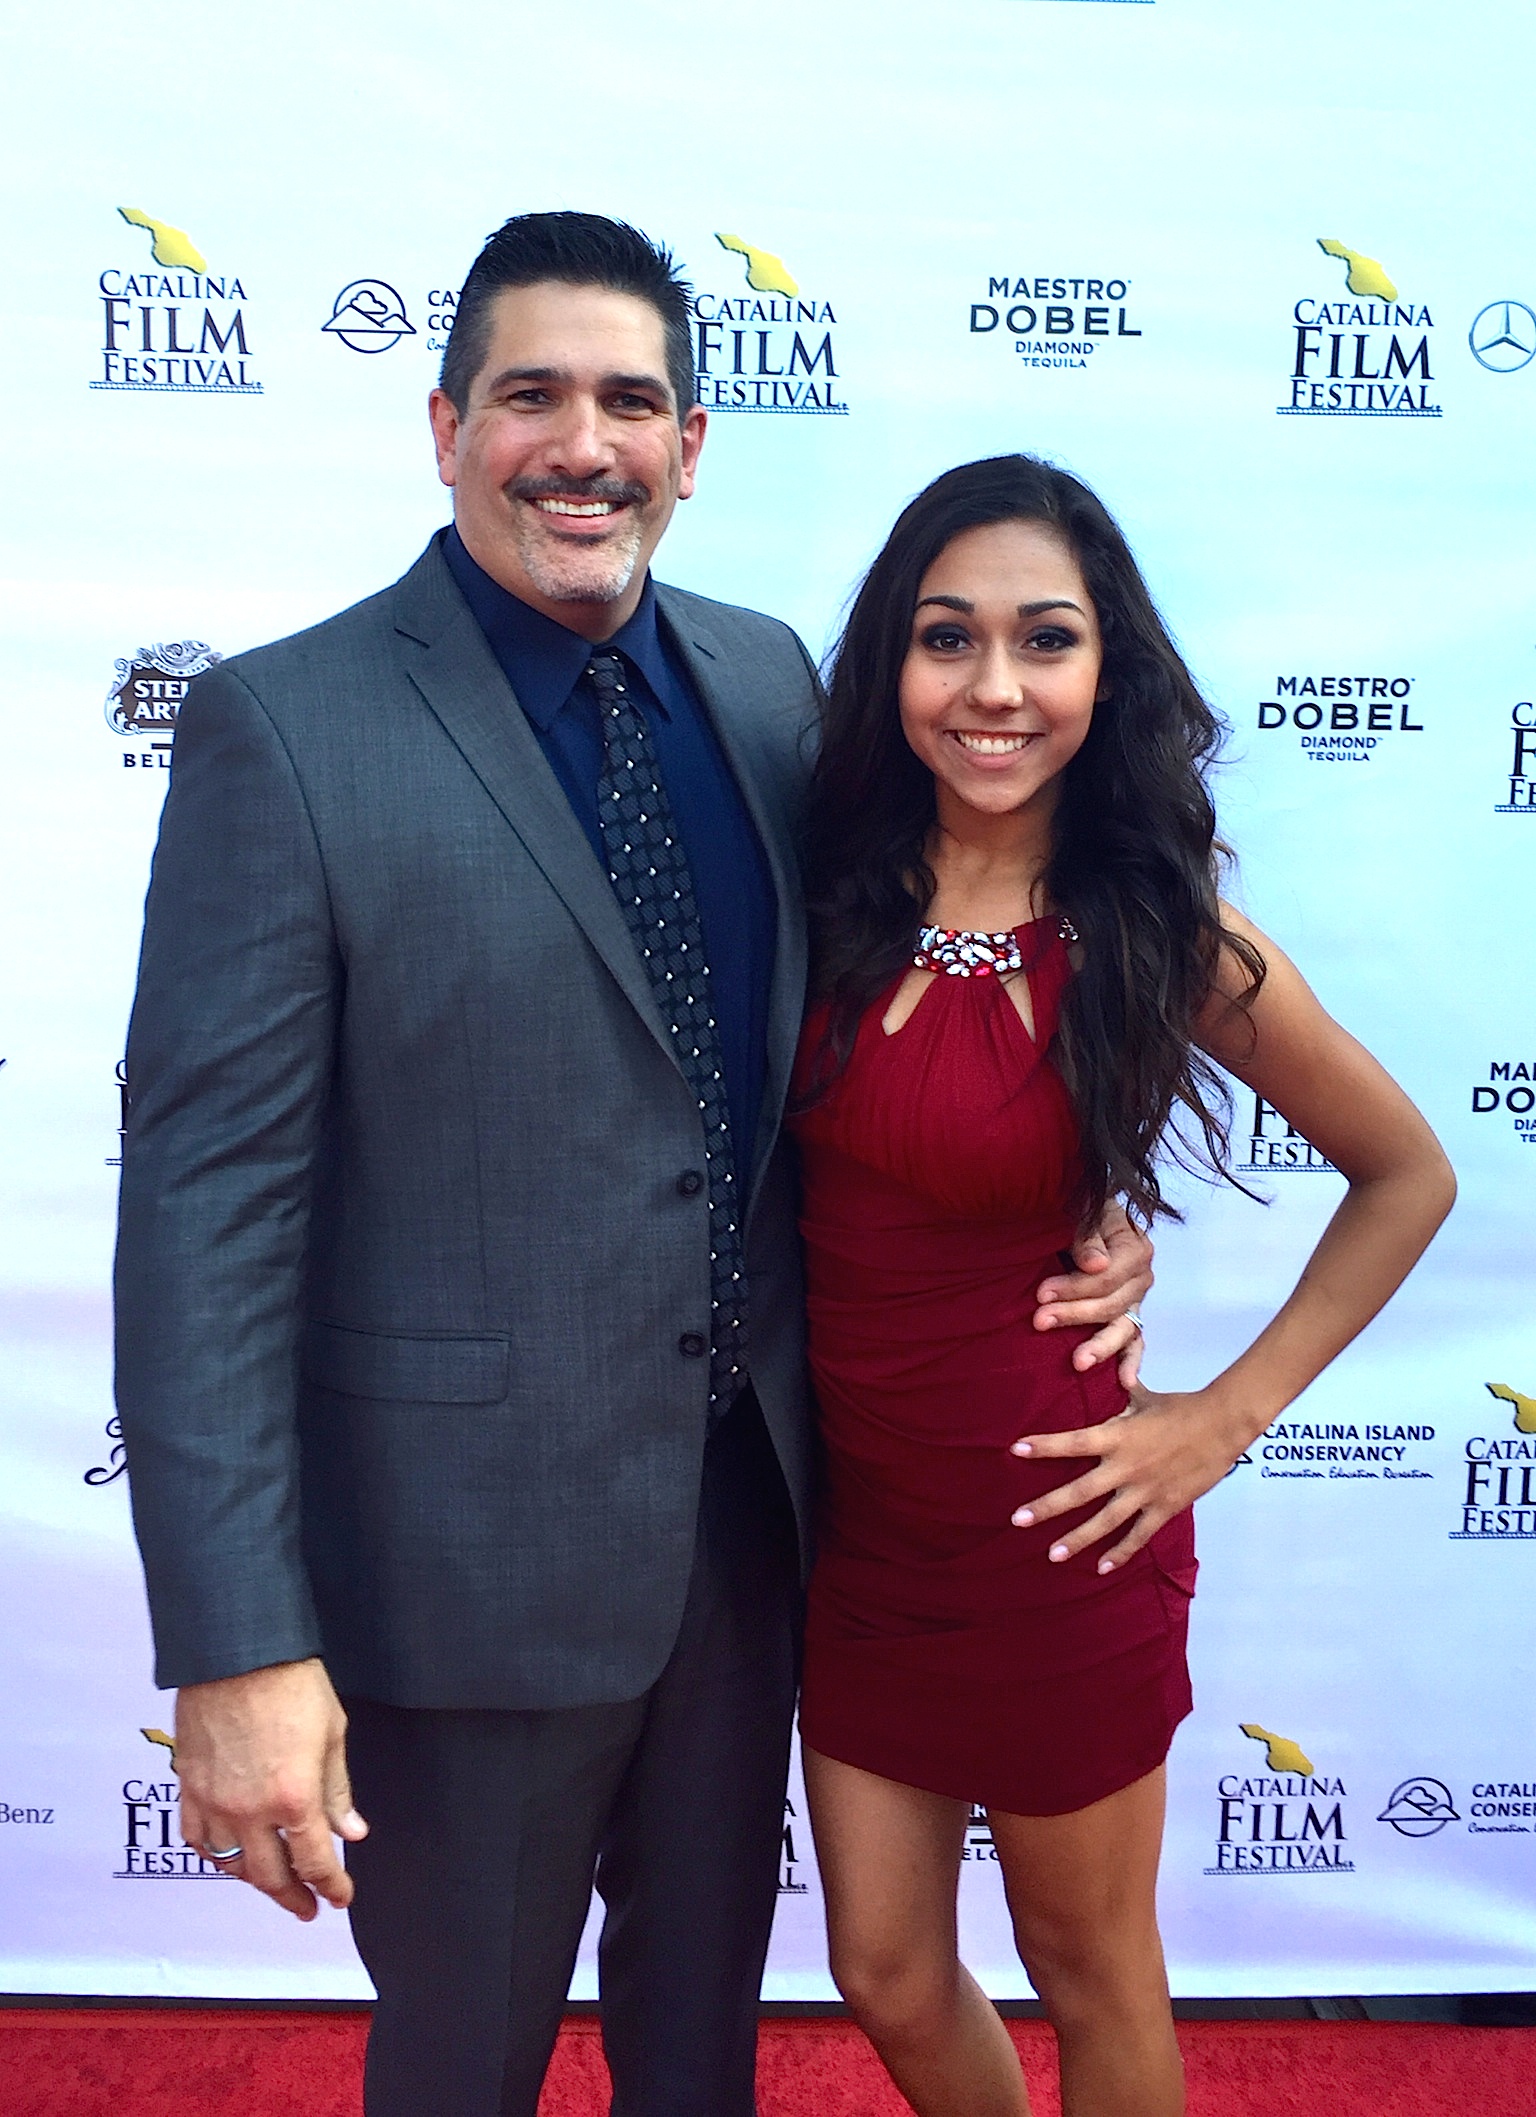 Thomas Haley and Brooklyn Haley. At the Catalina Film Festival 2014 Screening THIRTEEN, an official Selection for the WES CRAVEN AWARD. 'THIRTEEN' Stars Brooklyn Haley as Violet and Thomas Haley as Det. Joe Williams. Produced by H2 CREW Productions.